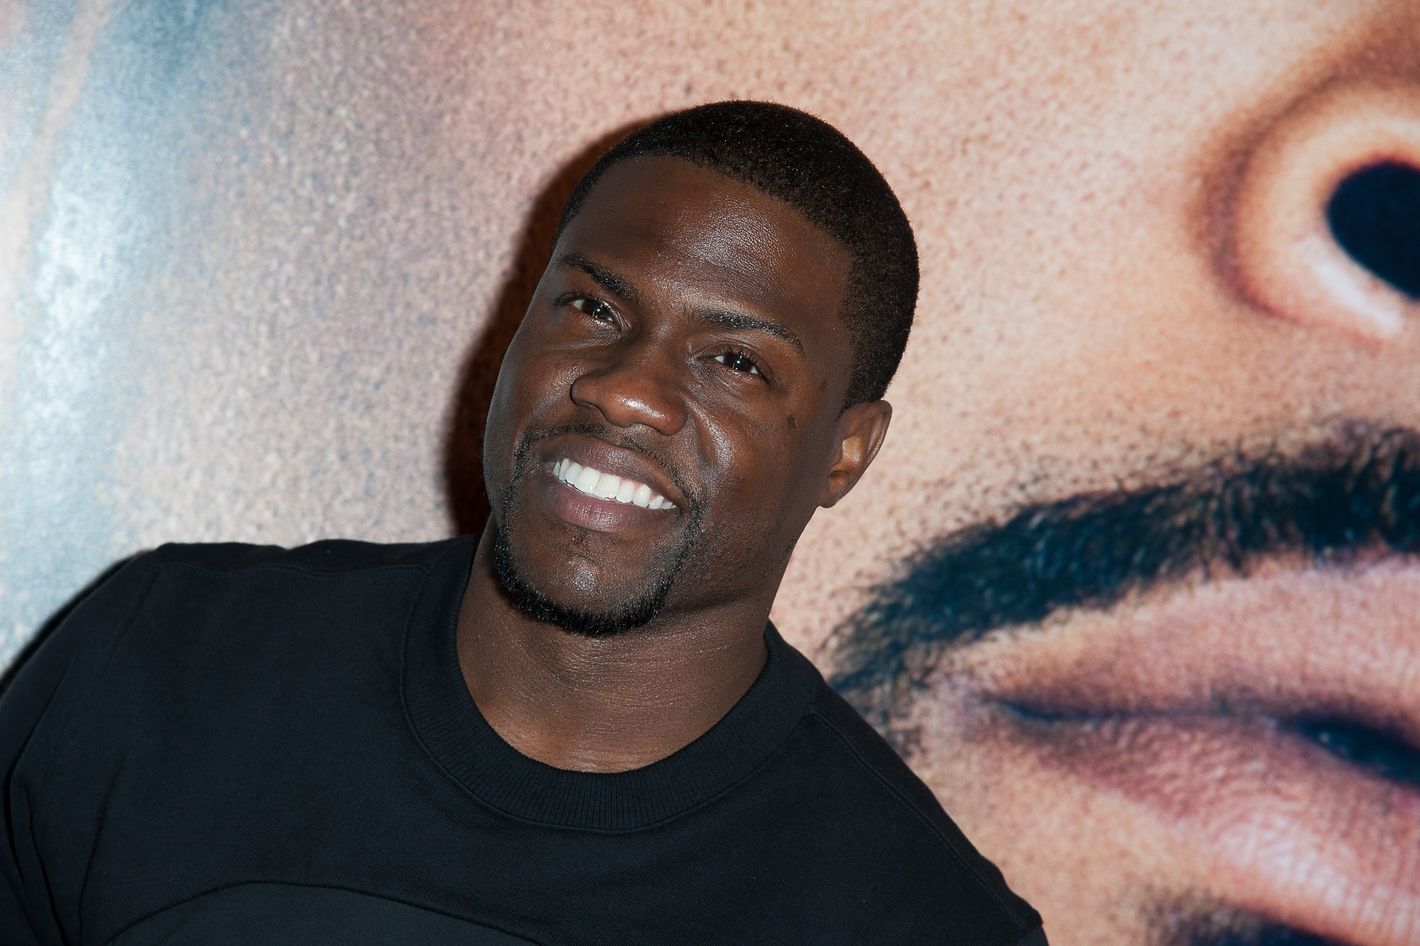 911 calls released from Kevin Hart car crash reveal pleas for help